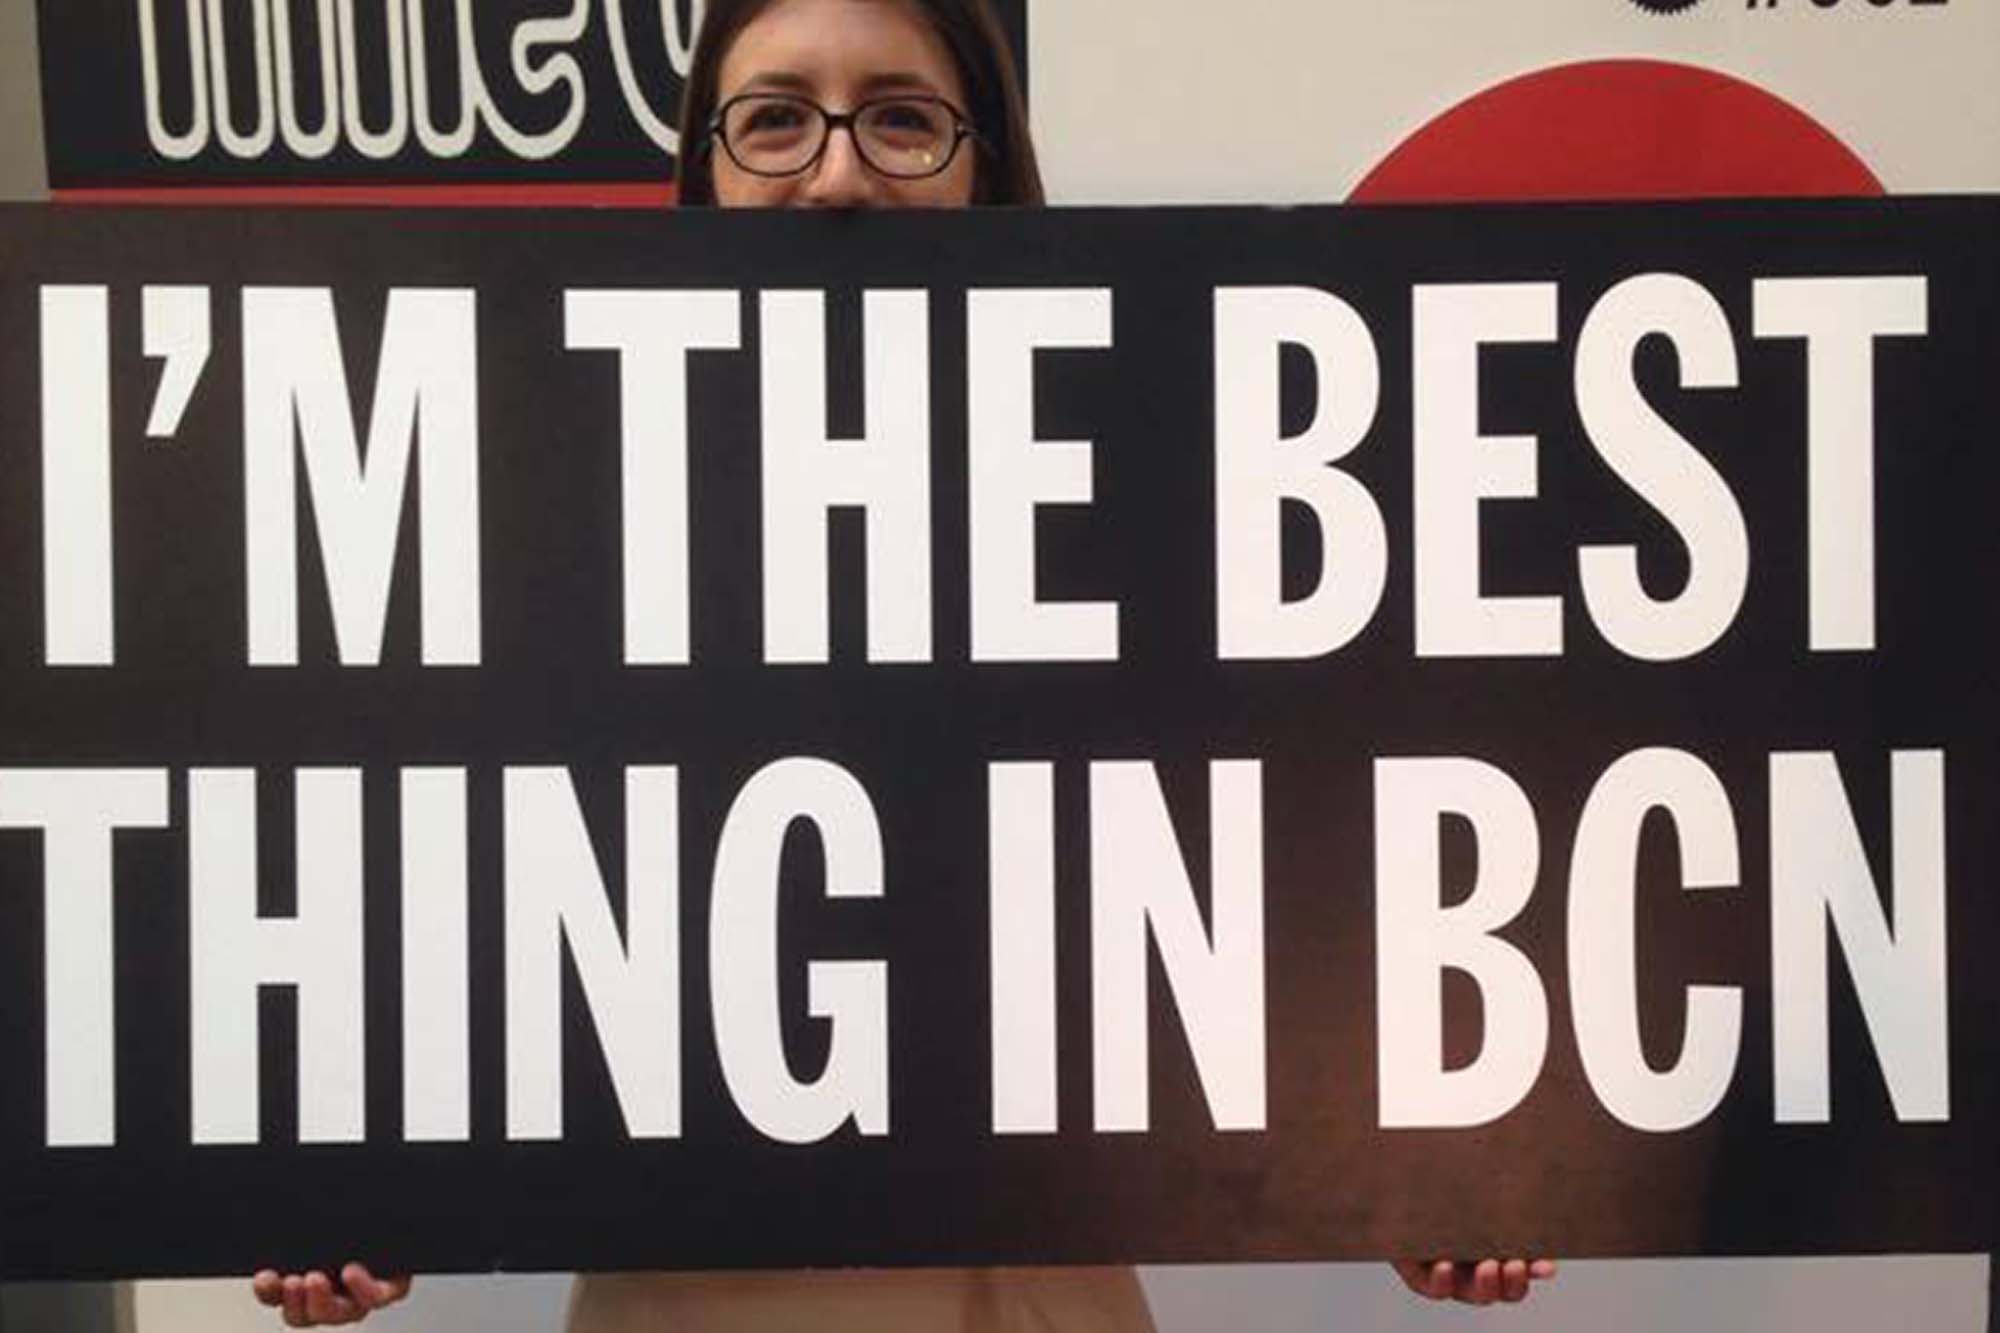 Claudia holds a sign that reads "I'm the best thing in BCN."